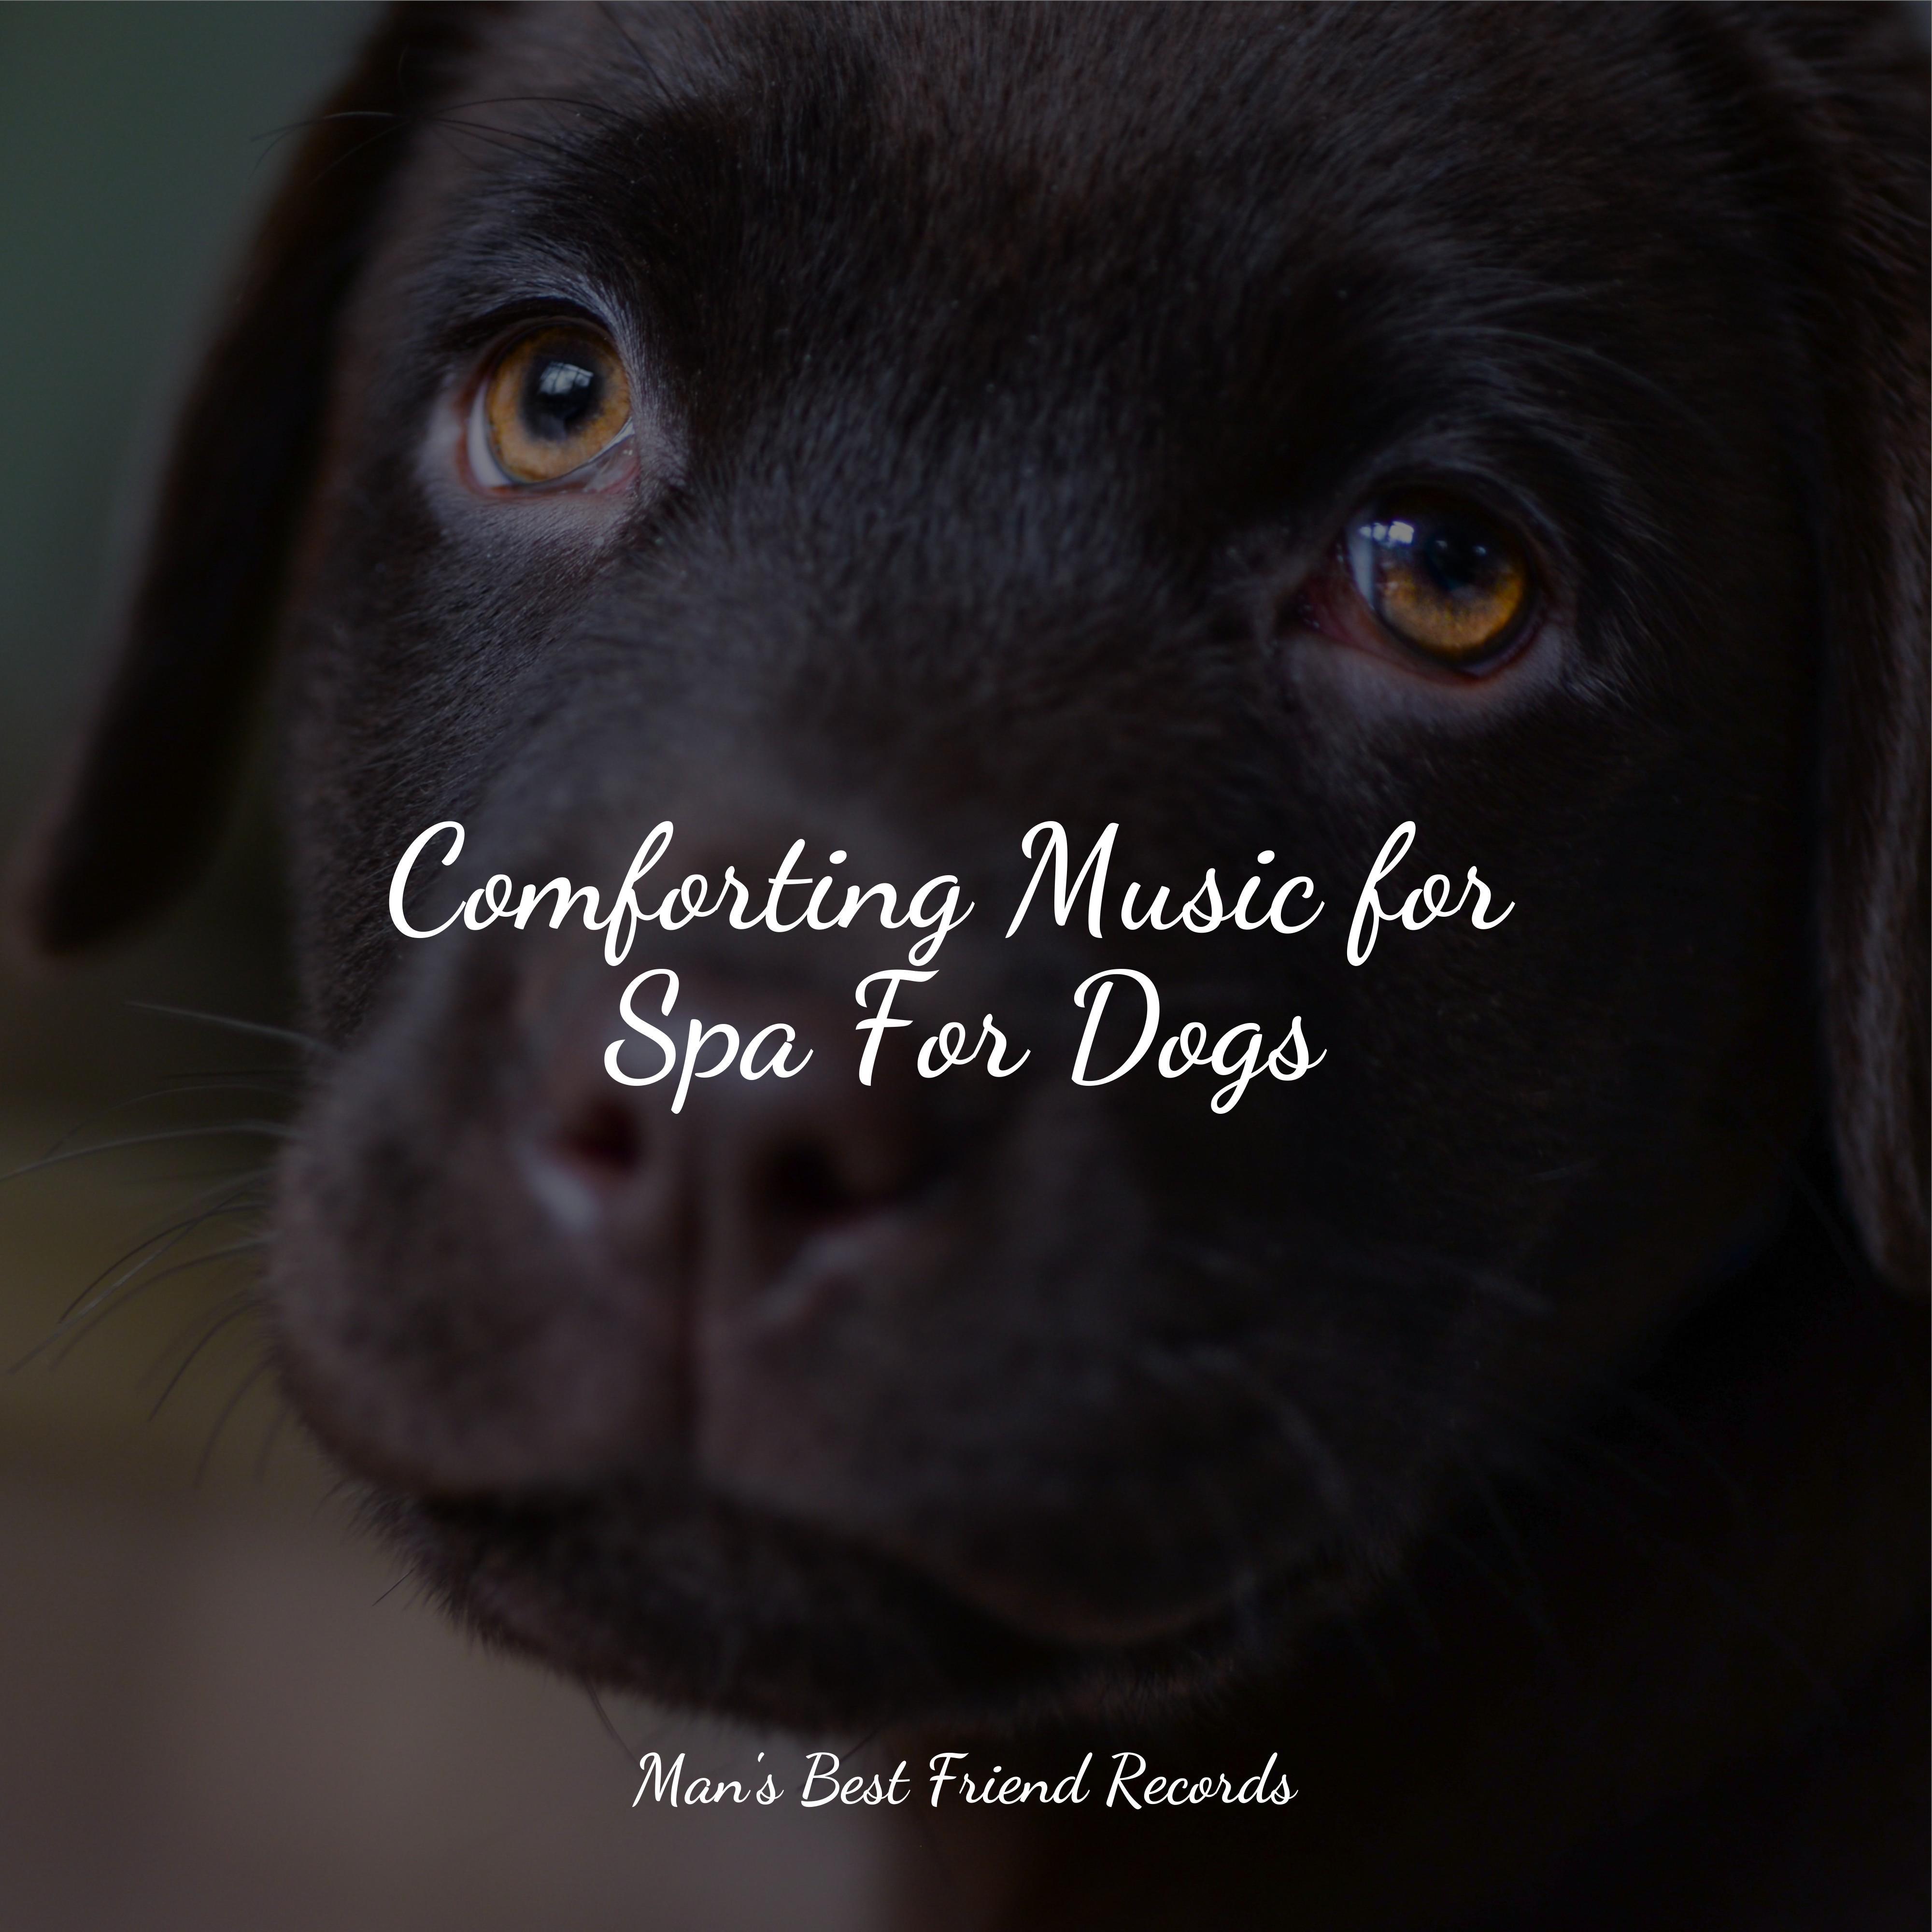 Music For Dogs - Starting Today